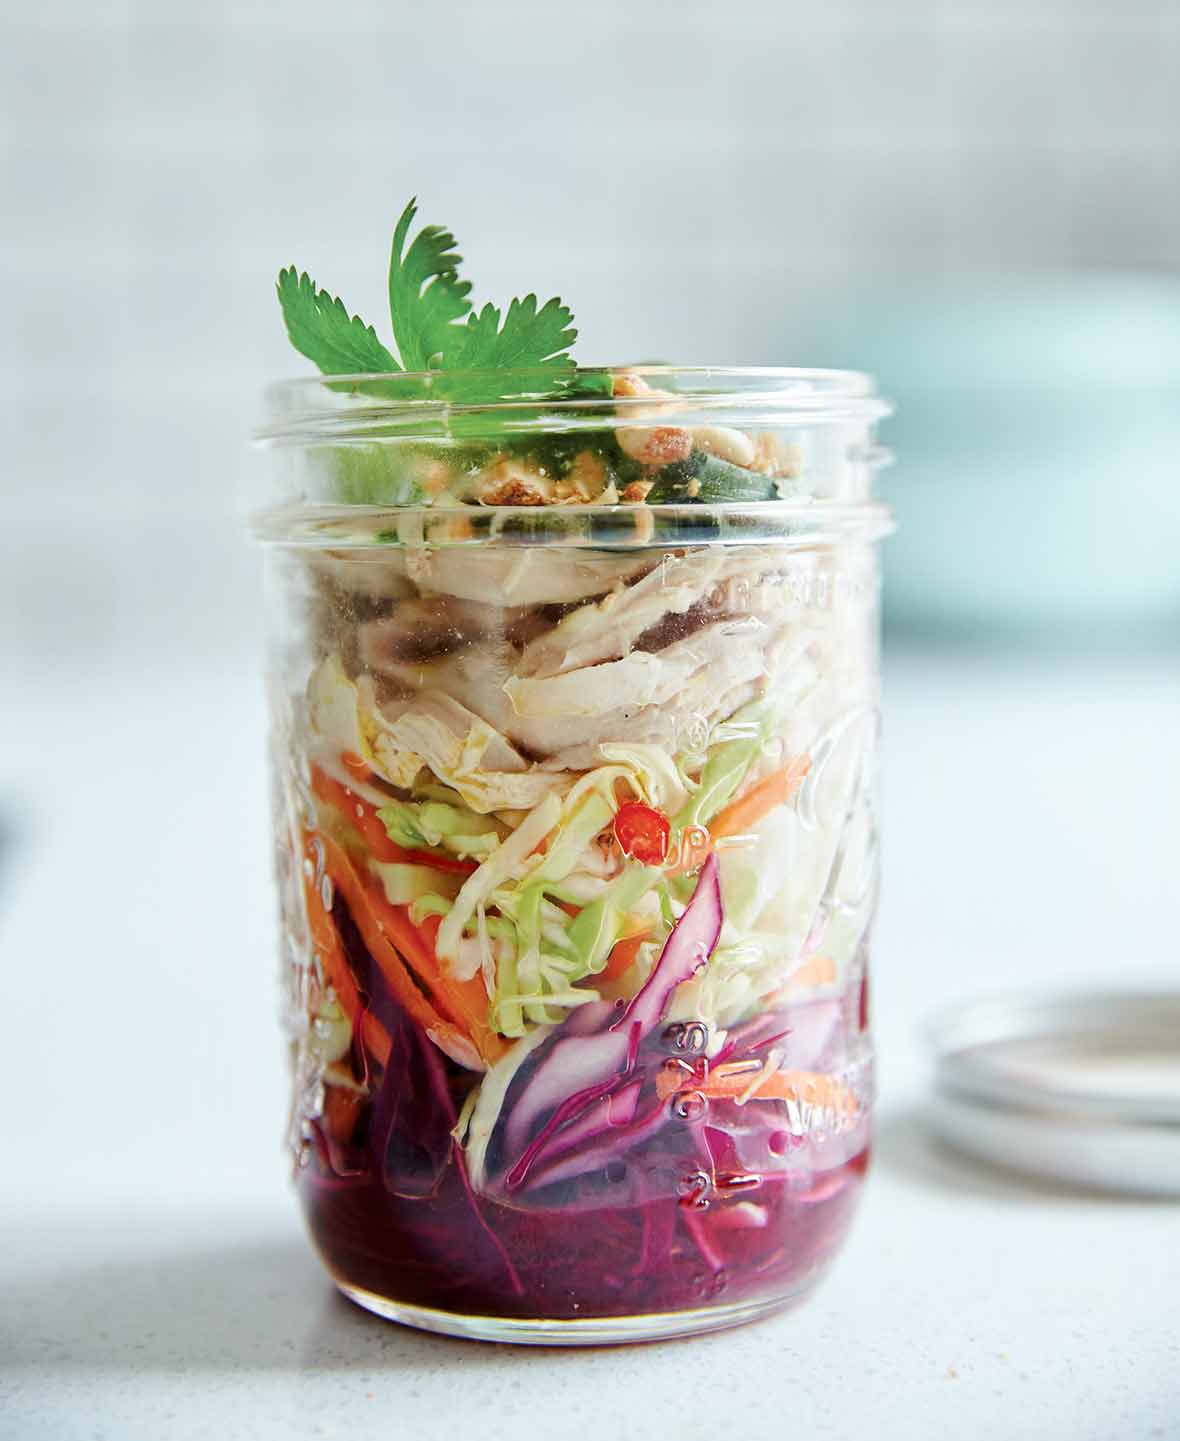 A glass jar filled with a layered Vietnamese chicken salad.